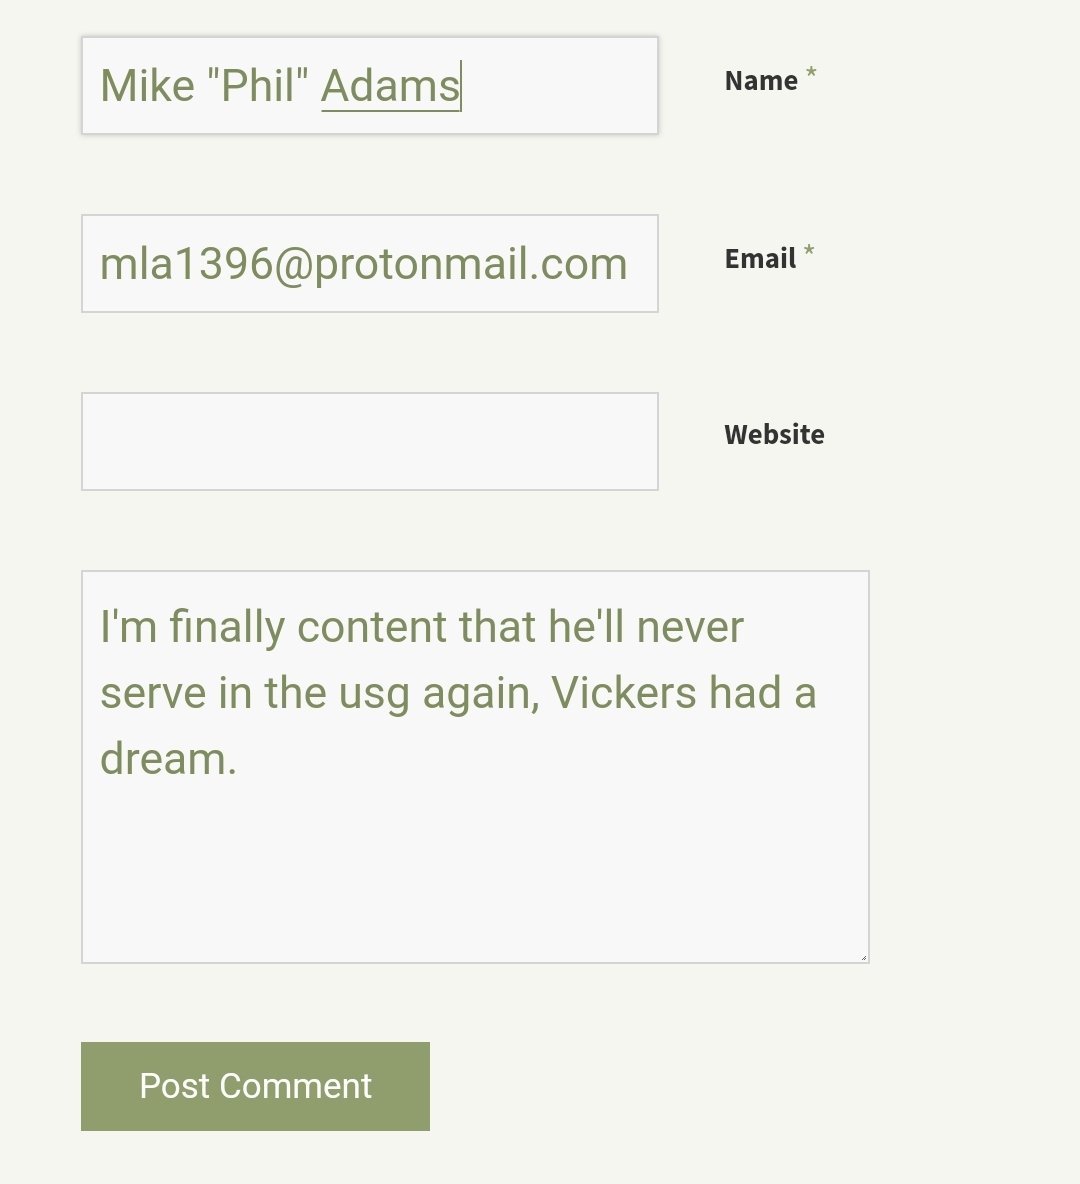 3/ Marcy states that "Phil has tried to leave at least three more comments, the last one making crystal clear that it was him". This is referring to when I figured out that "Phil" was Michael L. Adams or the defunct Twitter user  @mla1396. Cc:  @GenFlynn  https://www.emptywheel.net/2020/12/01/trump-attempts-to-invalidate-the-mueller-investigation/#comment-869517